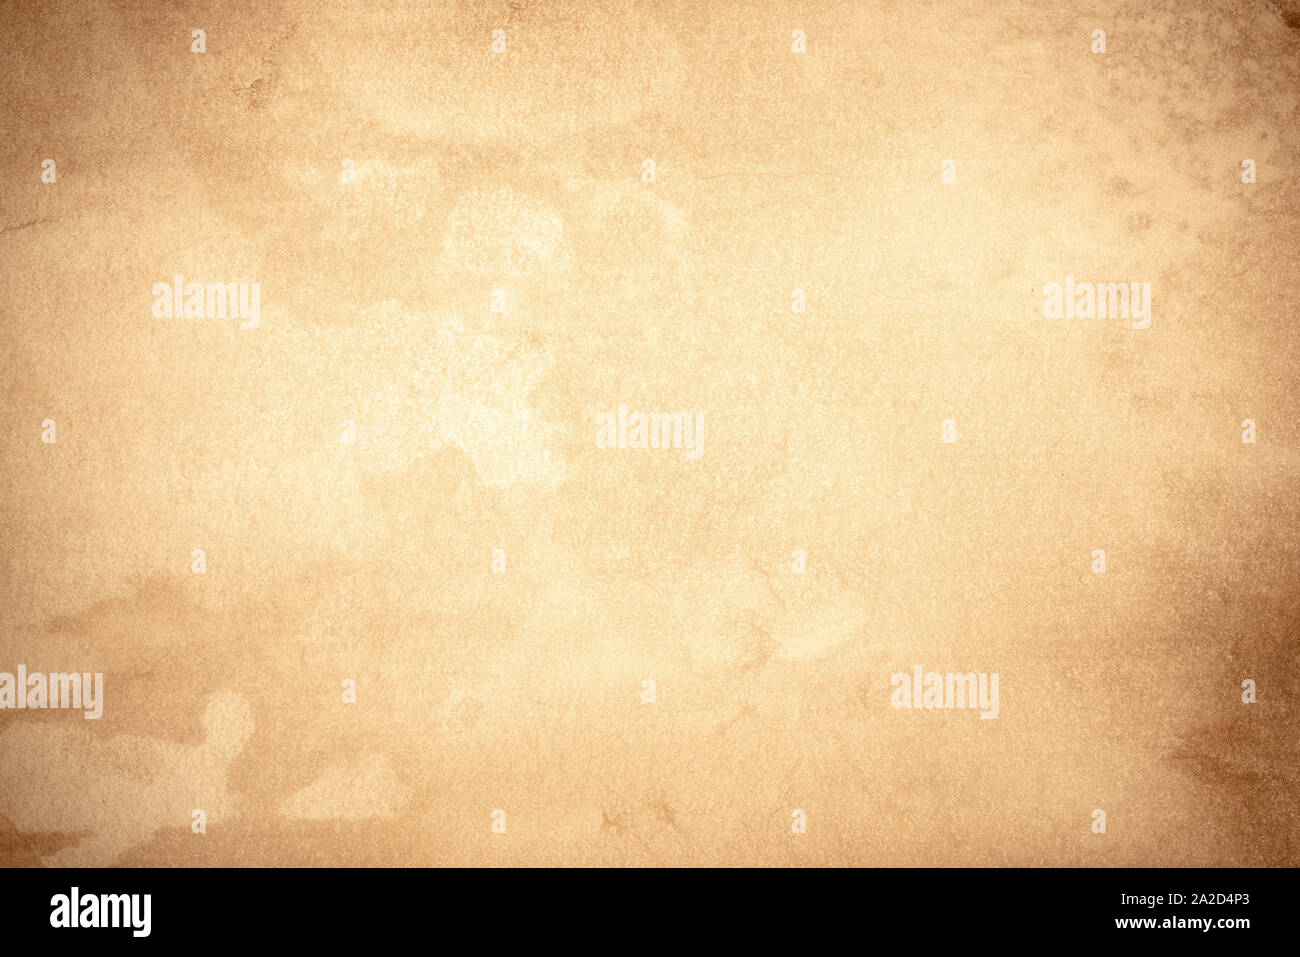 Old Dirty Sheet Of Paper As Background Or Texture Stock Photo Alamy